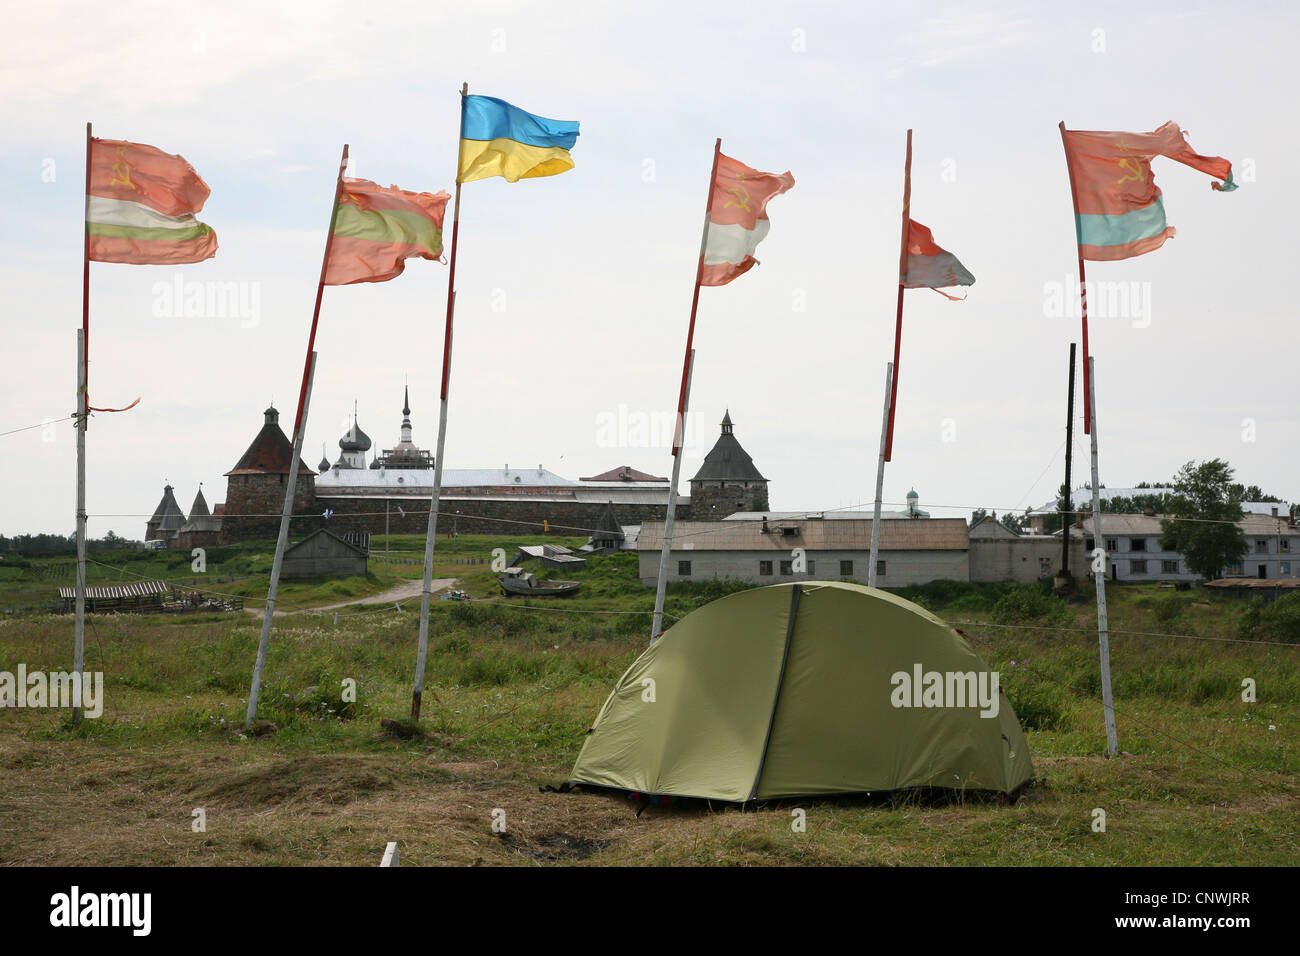 Old Soviet republics flags beside the Ukrainian flag waving over the pilgrim camp on the Solovetsky Islands, Russia. Stock Photo